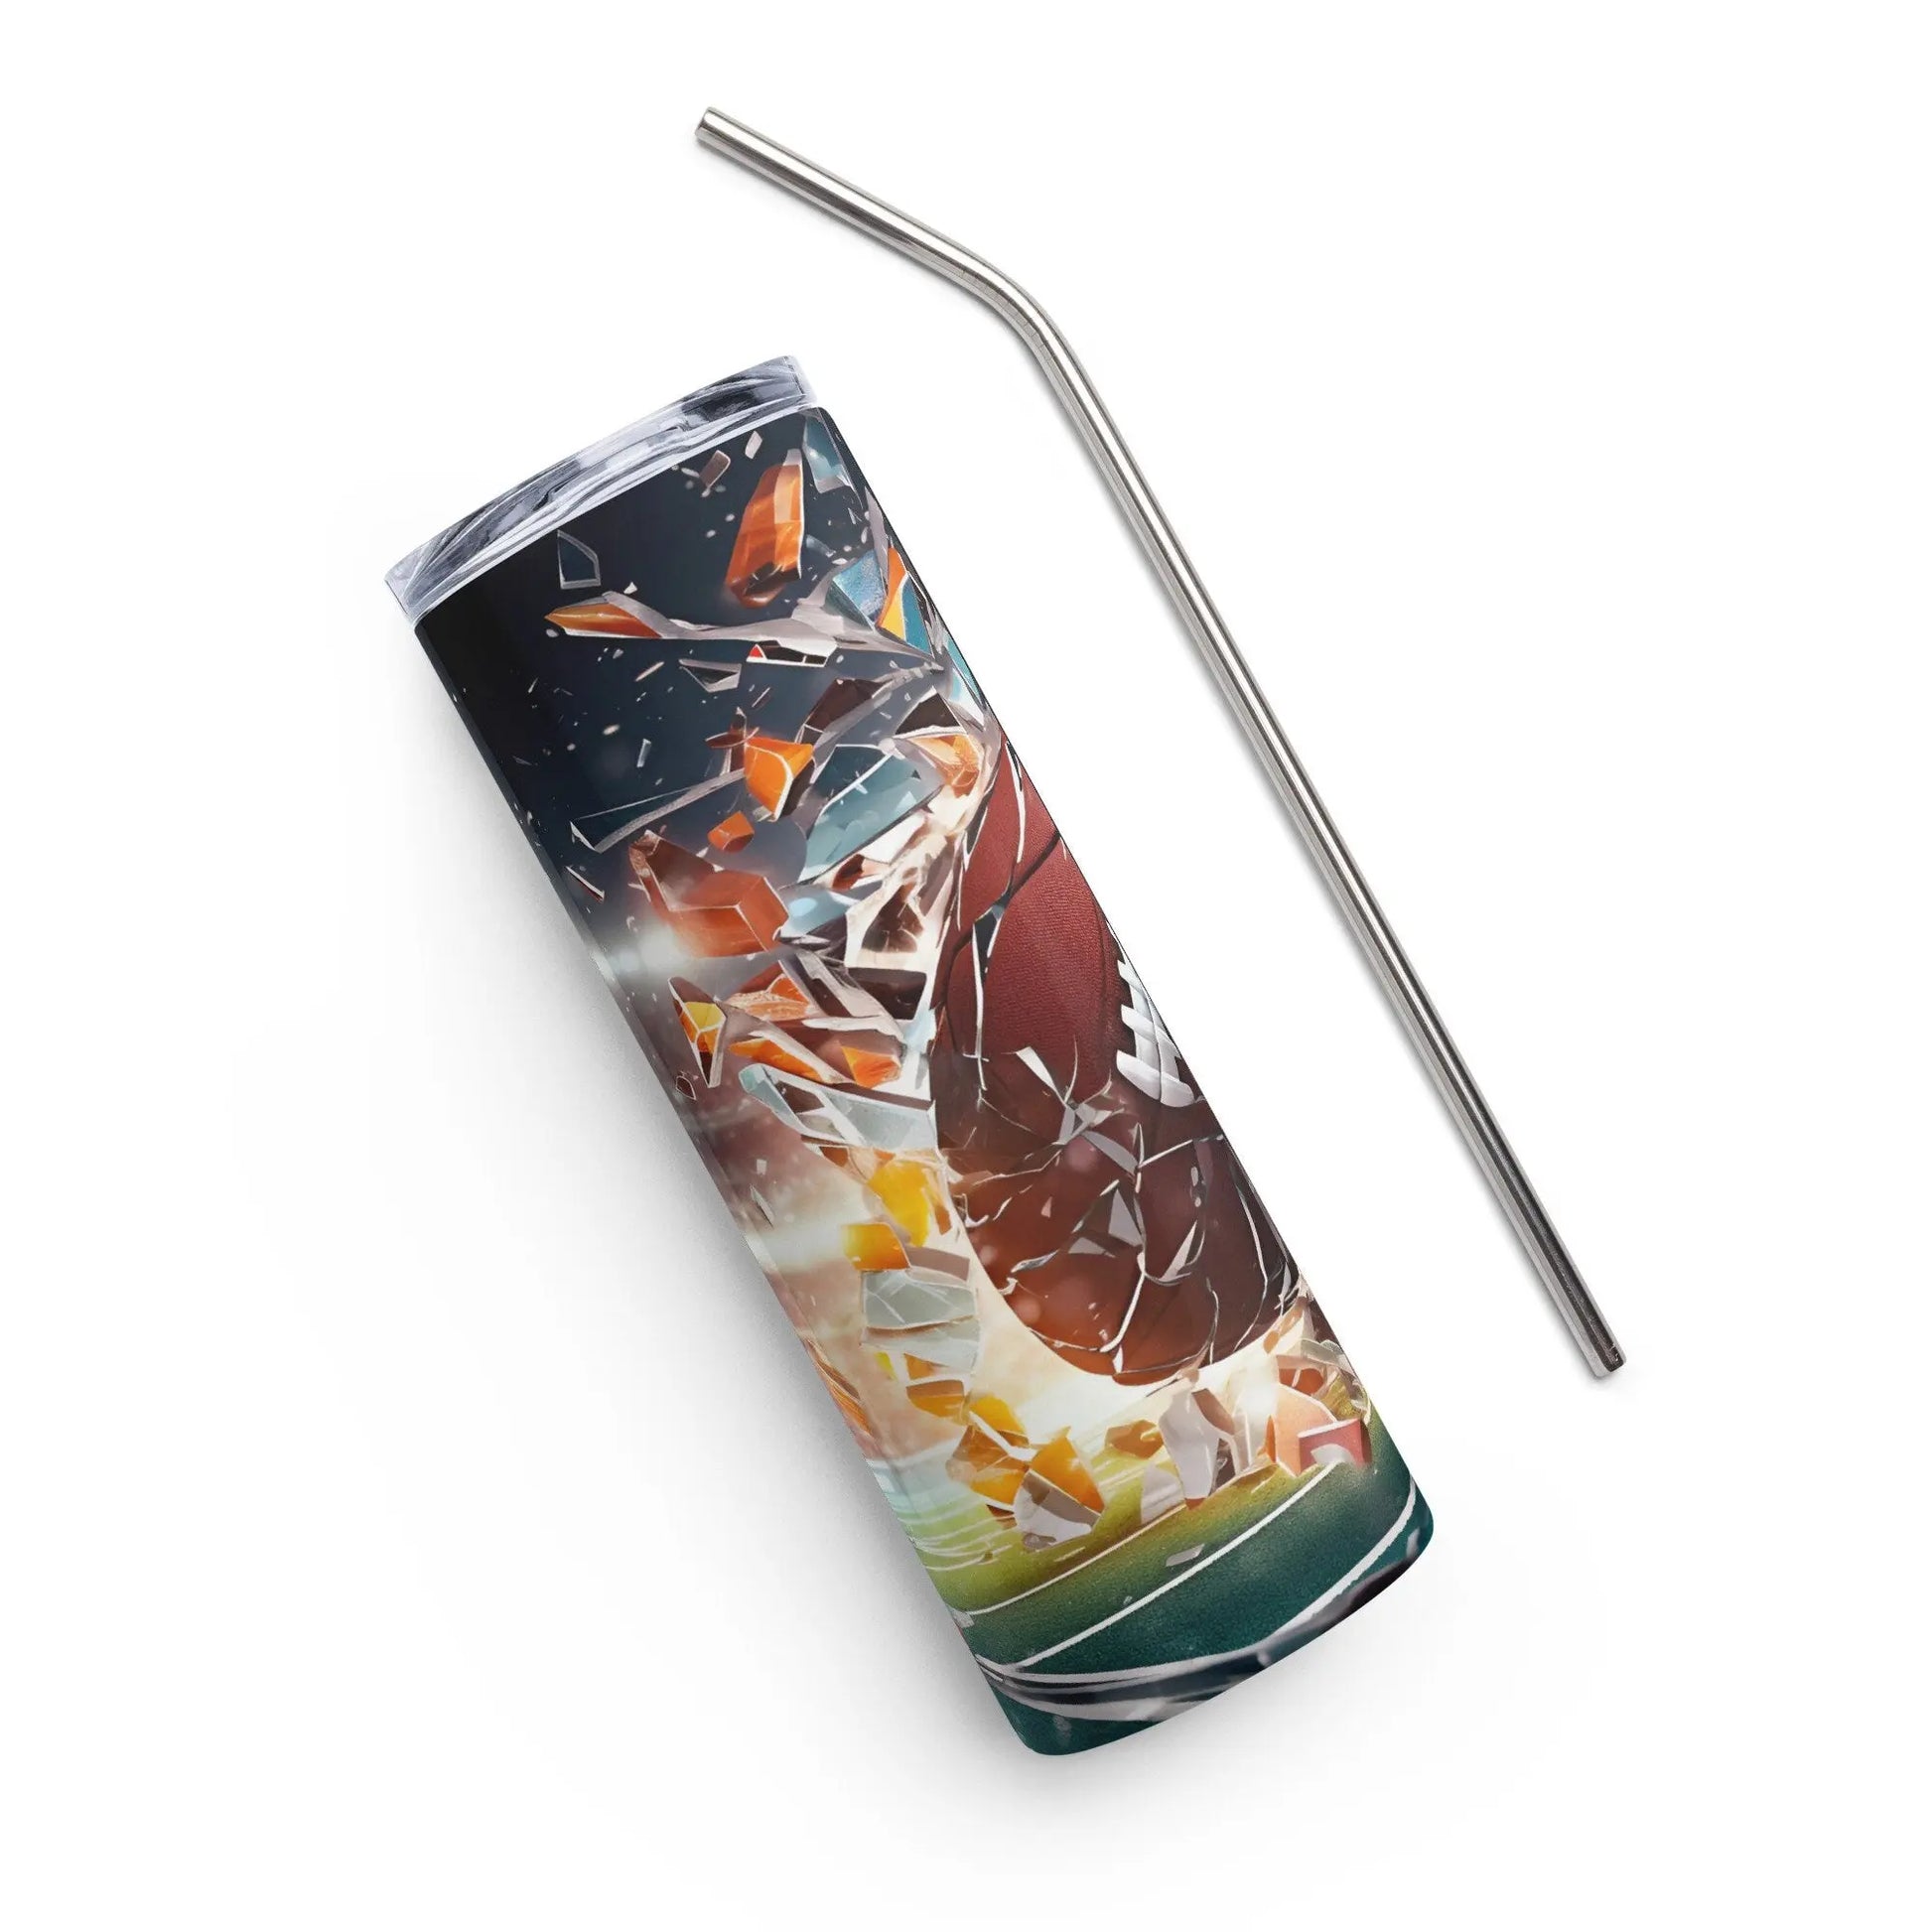 3D Embroidered Shattered Glass Football Sublimation Tumbler Gift for Men